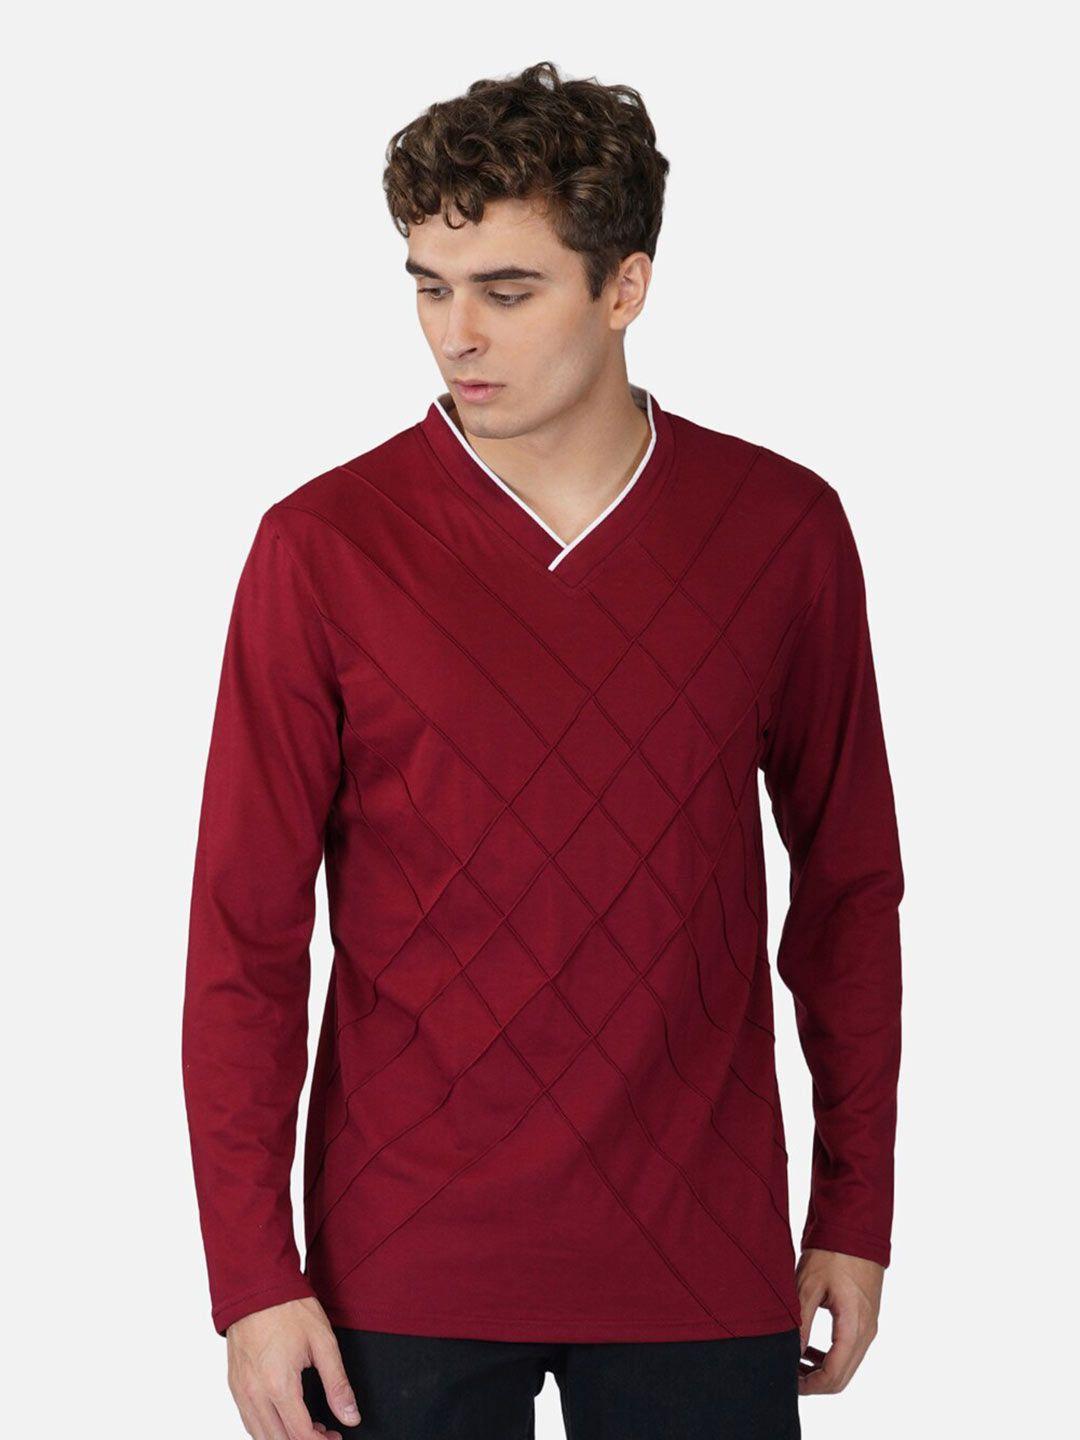 clafoutis-men-maroon-solid-v-neck-cotton-t-shirt